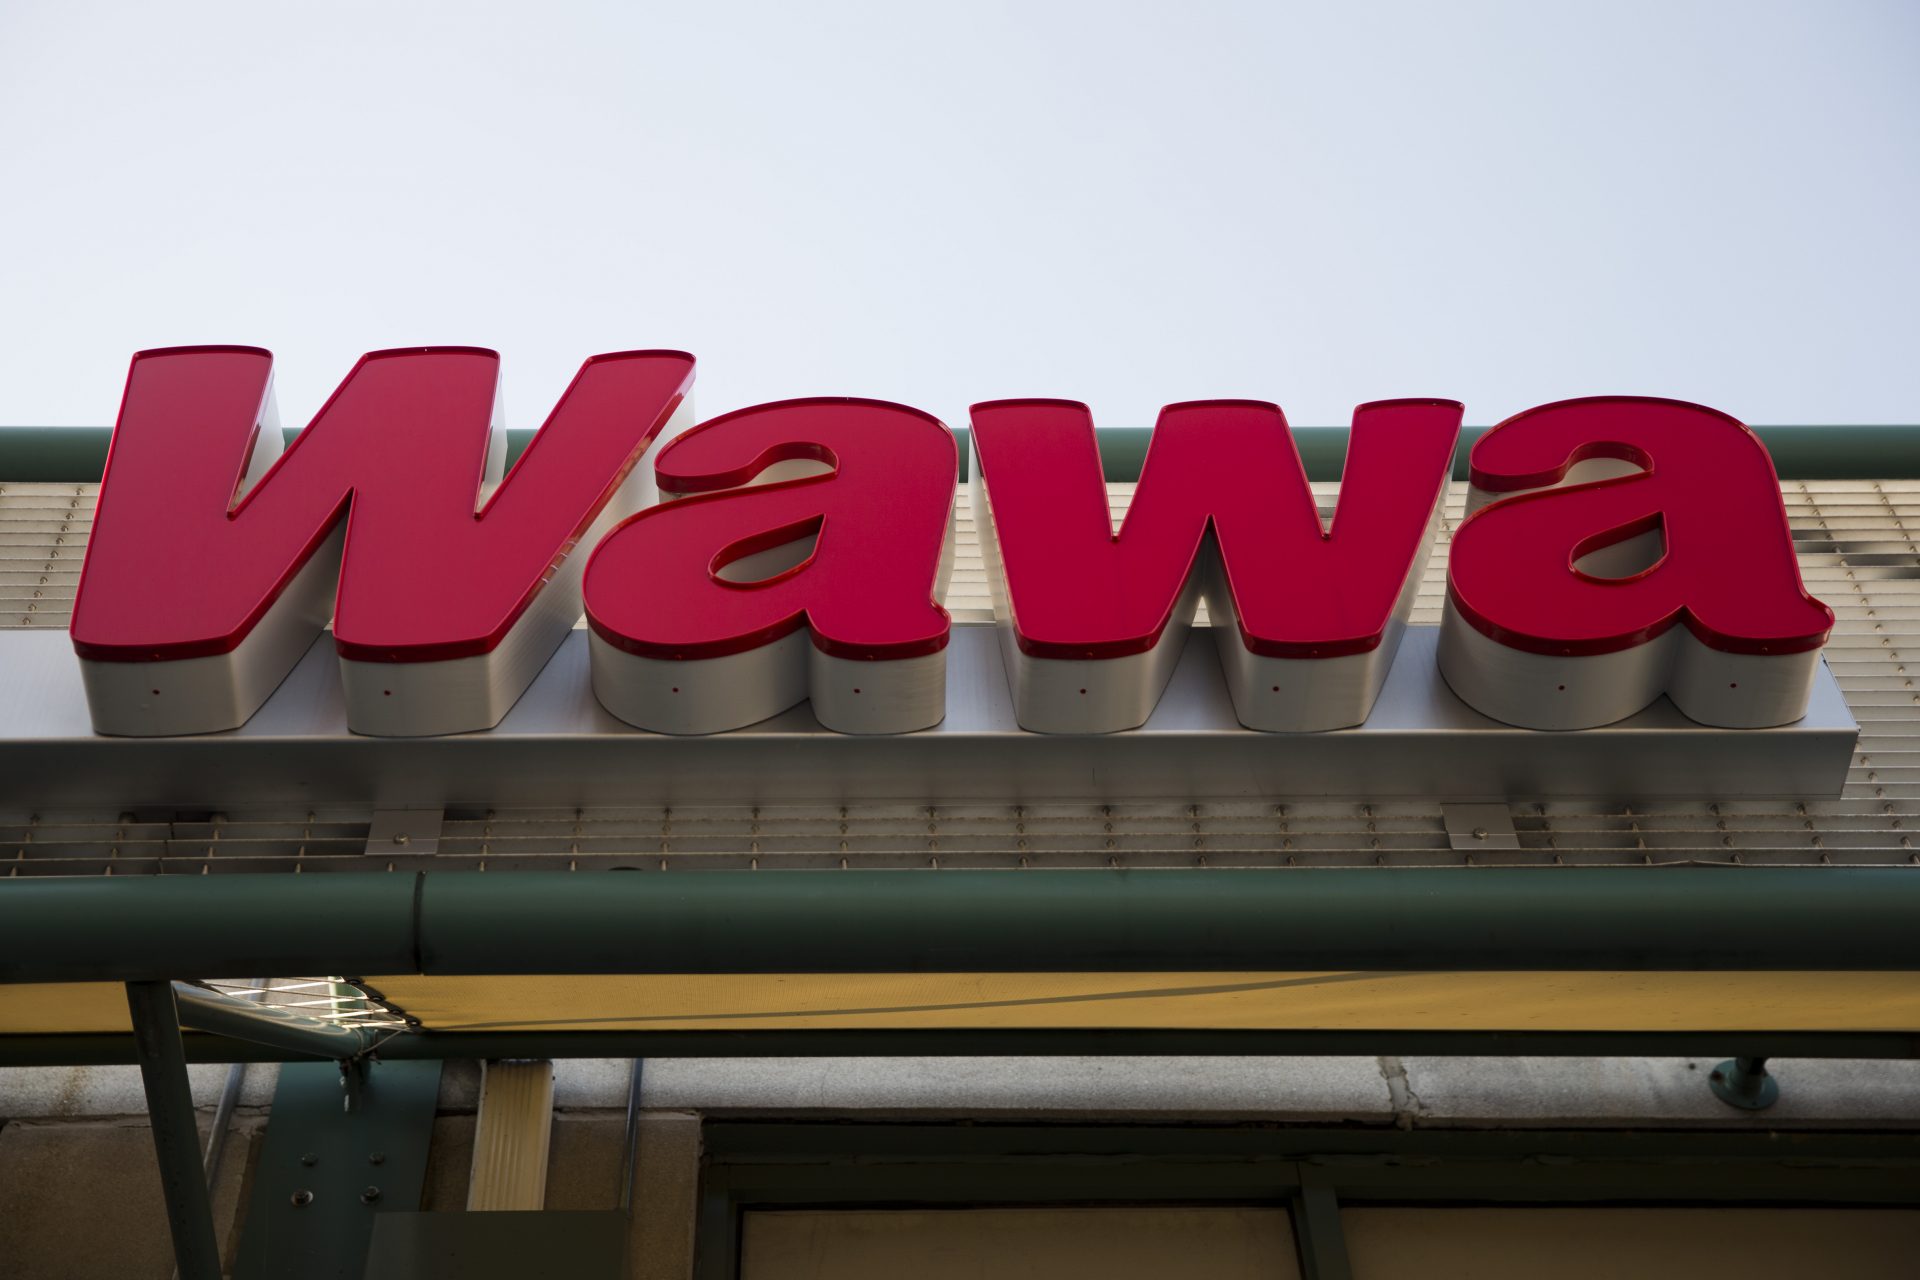 This April 2, 2015 file photo shows a Wawa convenience store in Philadelphia.